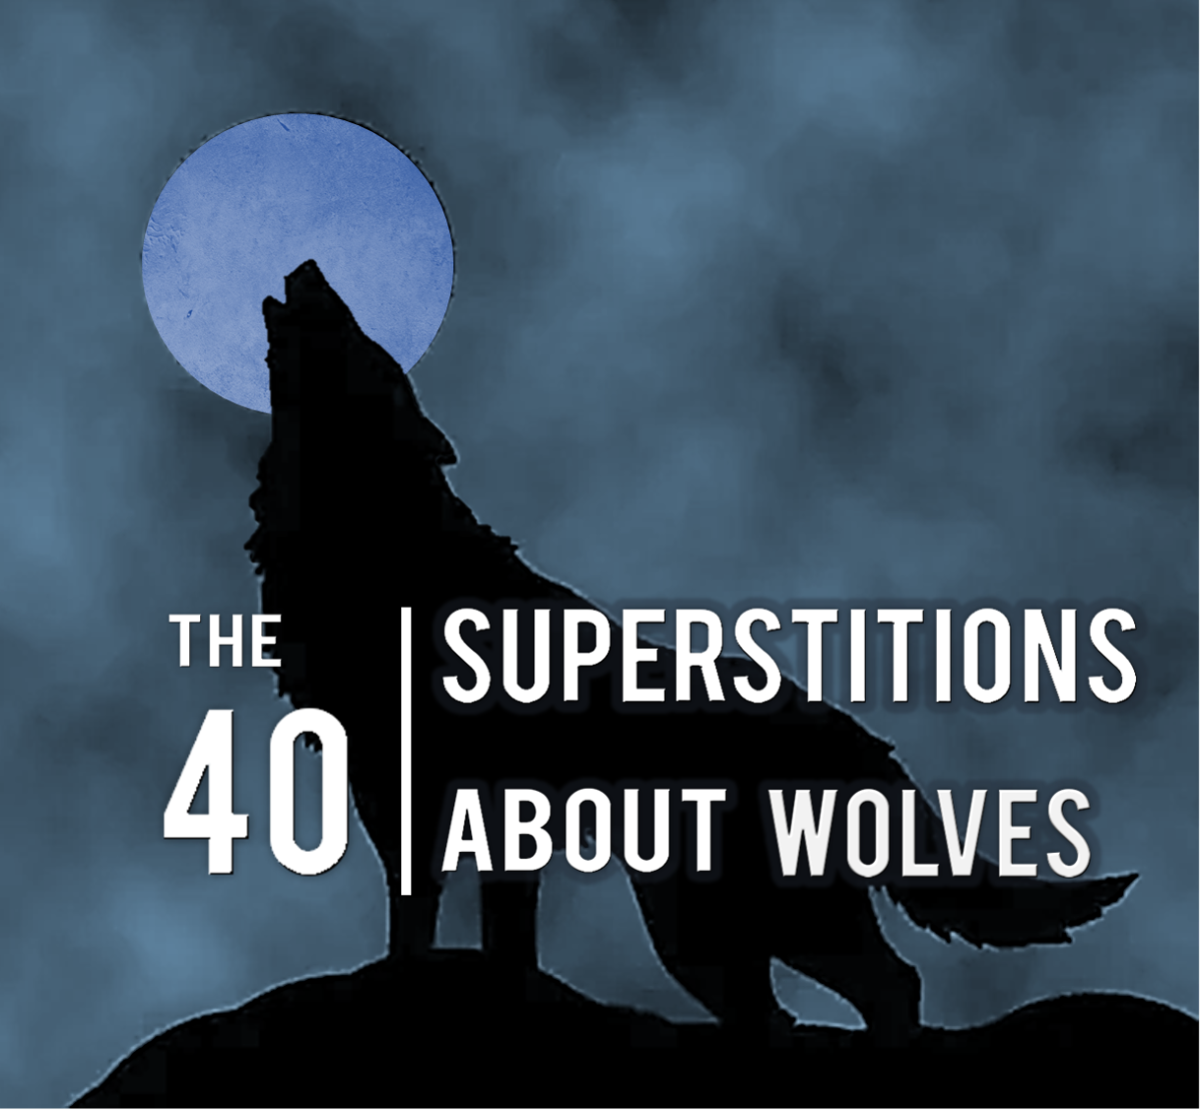 Superstitions about wolves